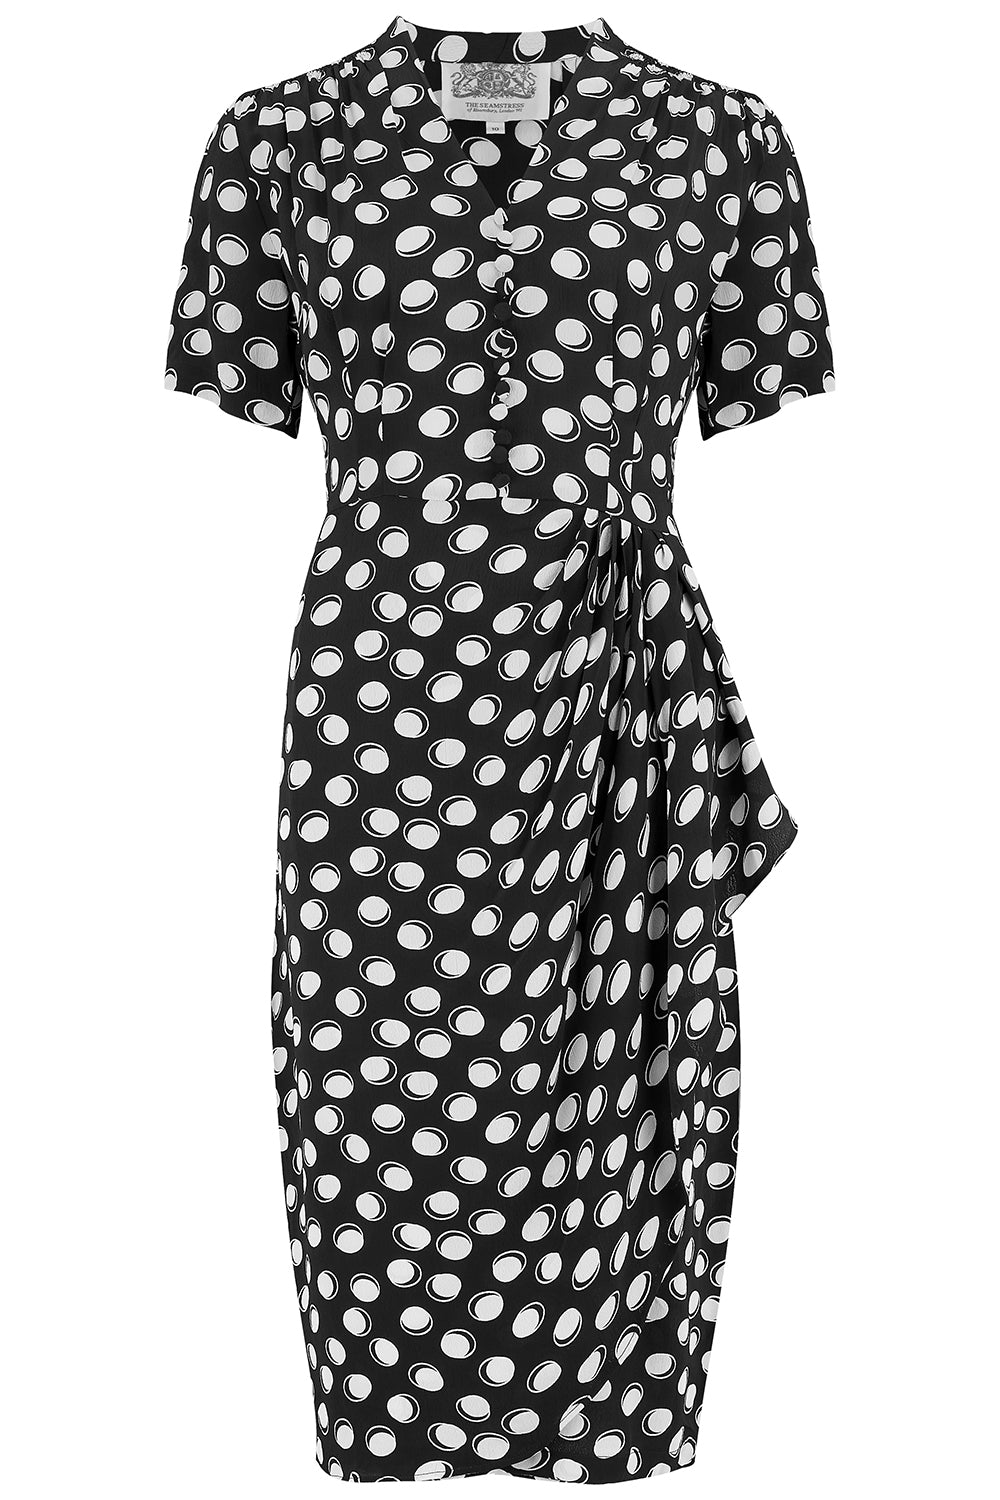 "Mabel" Dress in Black Moonshine Print, A Classic 1940s Inspired Vintage Style - True and authentic vintage style clothing, inspired by the Classic styles of CC41 , WW2 and the fun 1950s RocknRoll era, for everyday wear plus events like Goodwood Revival, Twinwood Festival and Viva Las Vegas Rockabilly Weekend Rock n Romance The Seamstress of Bloomsbury